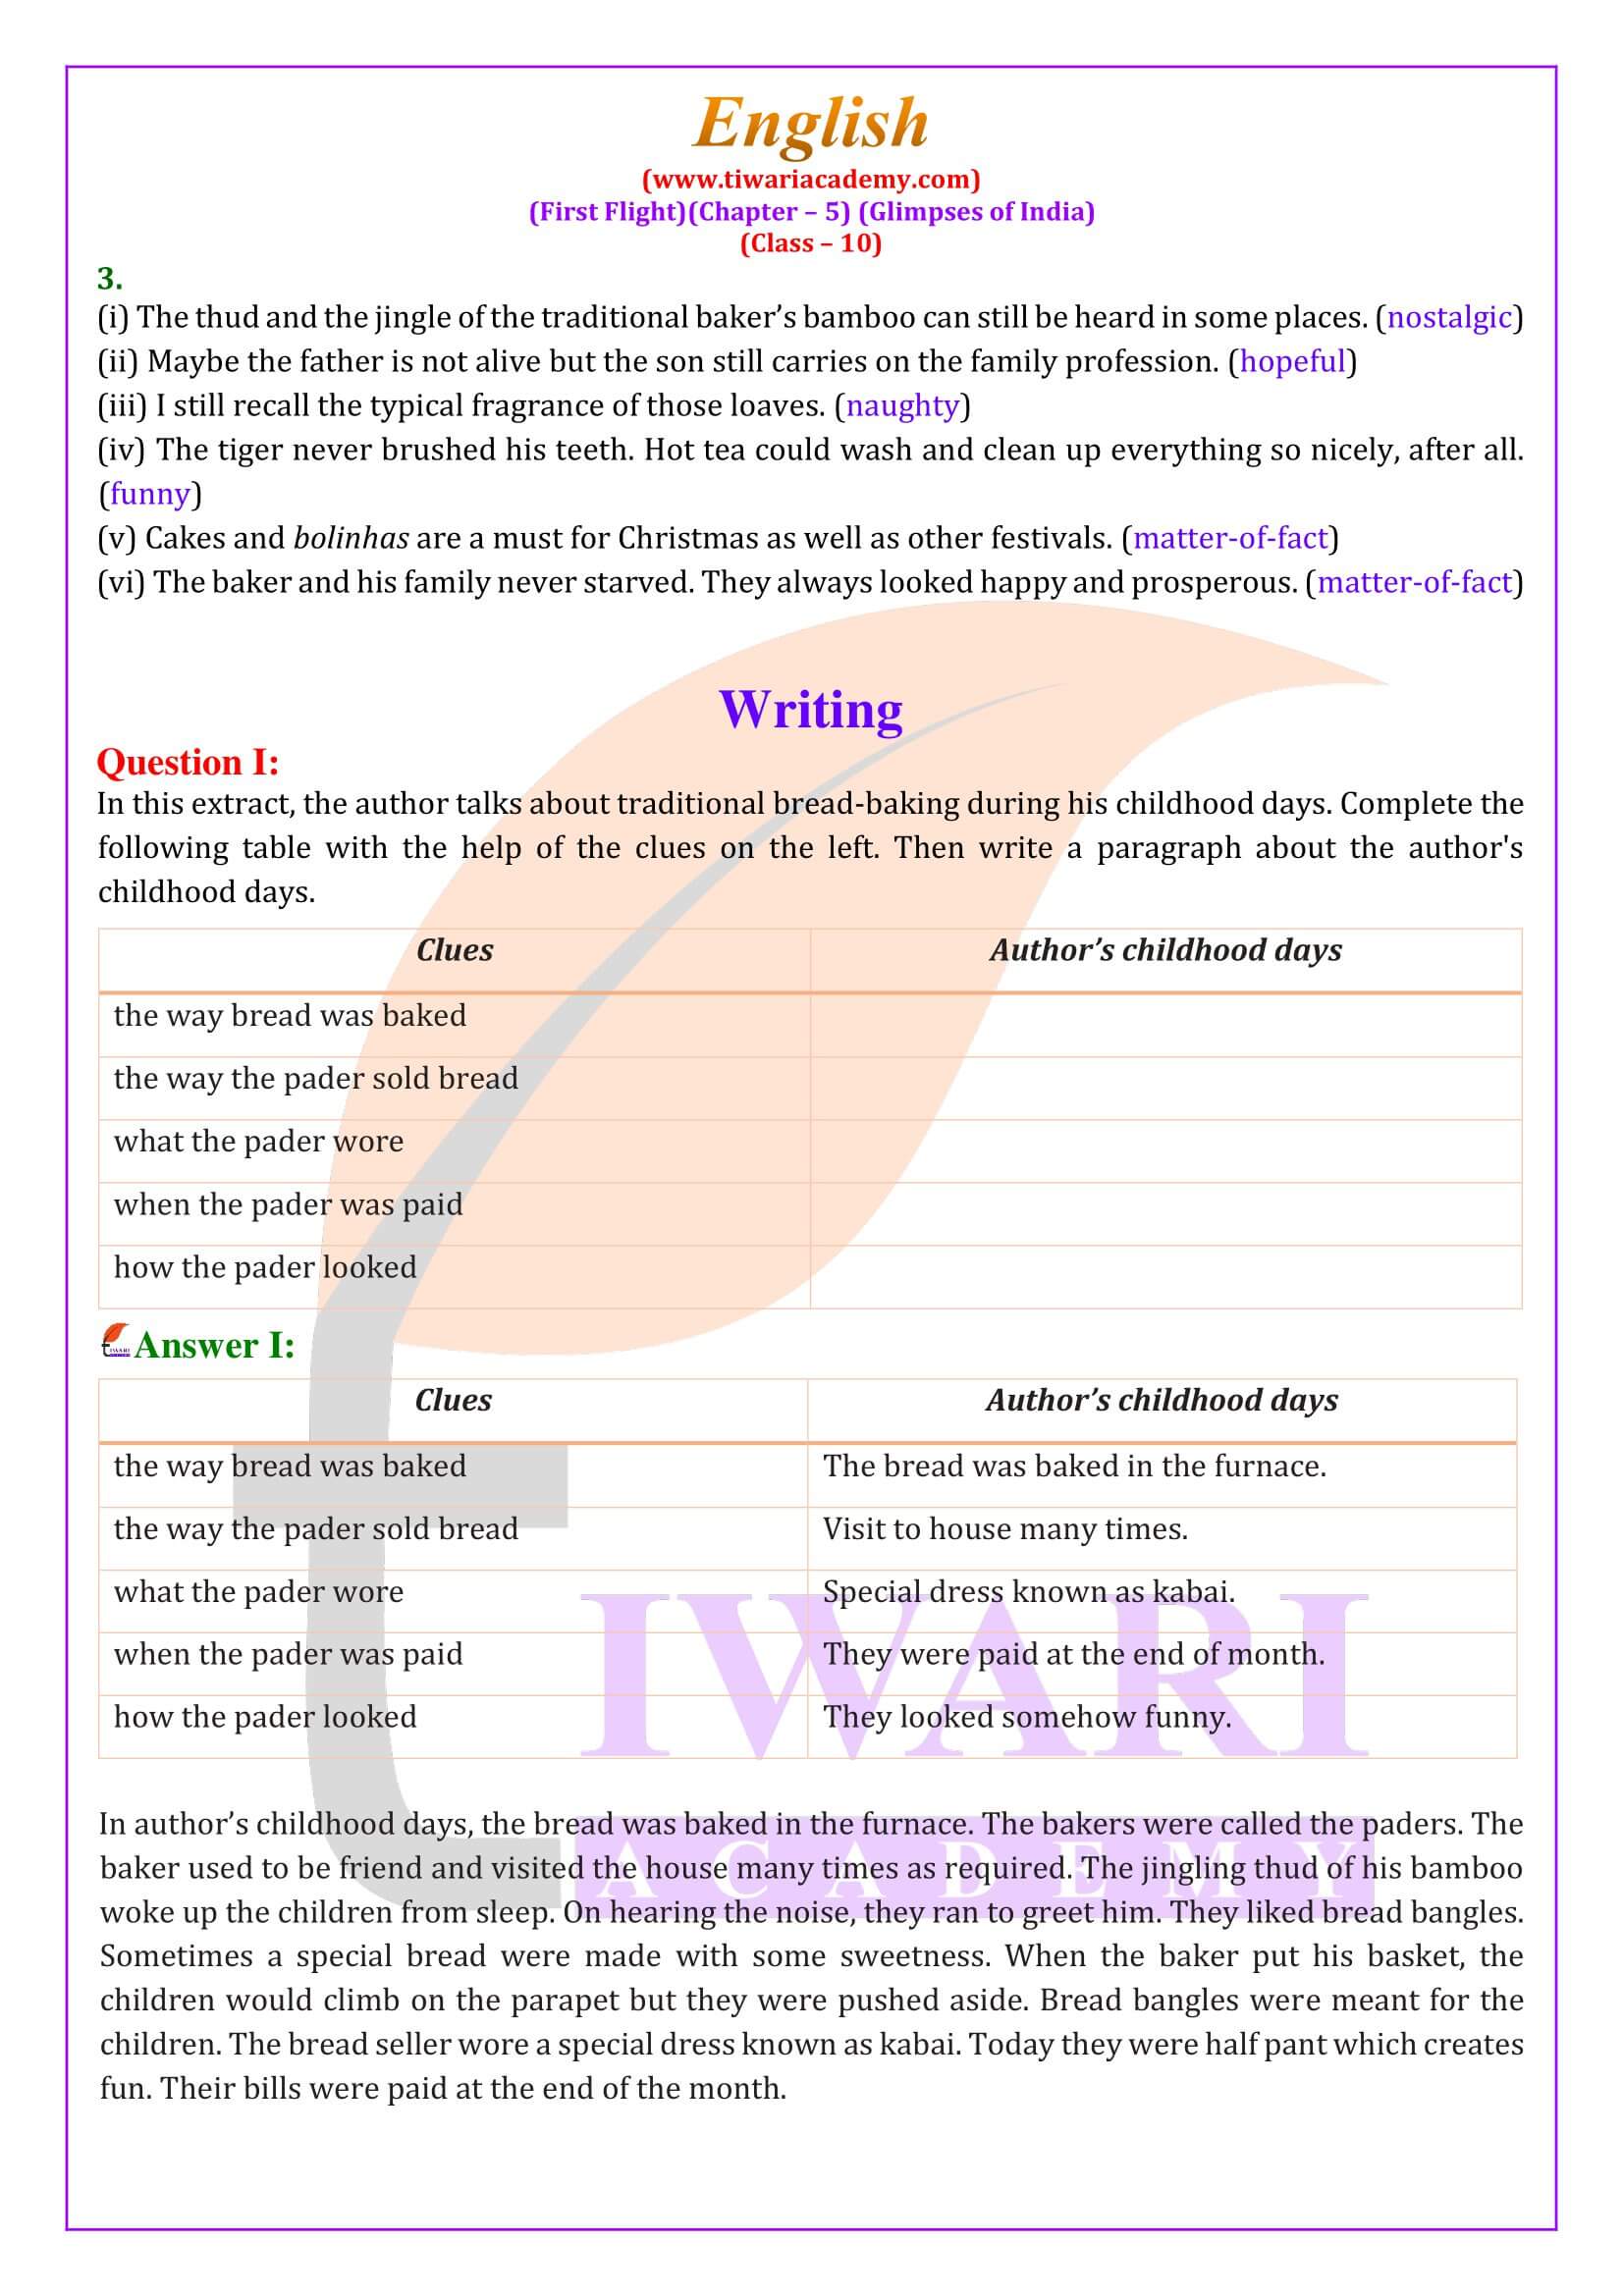 NCERT Solutions for Class 10 English First Flight Chapter 5 Glimpses of India Guide